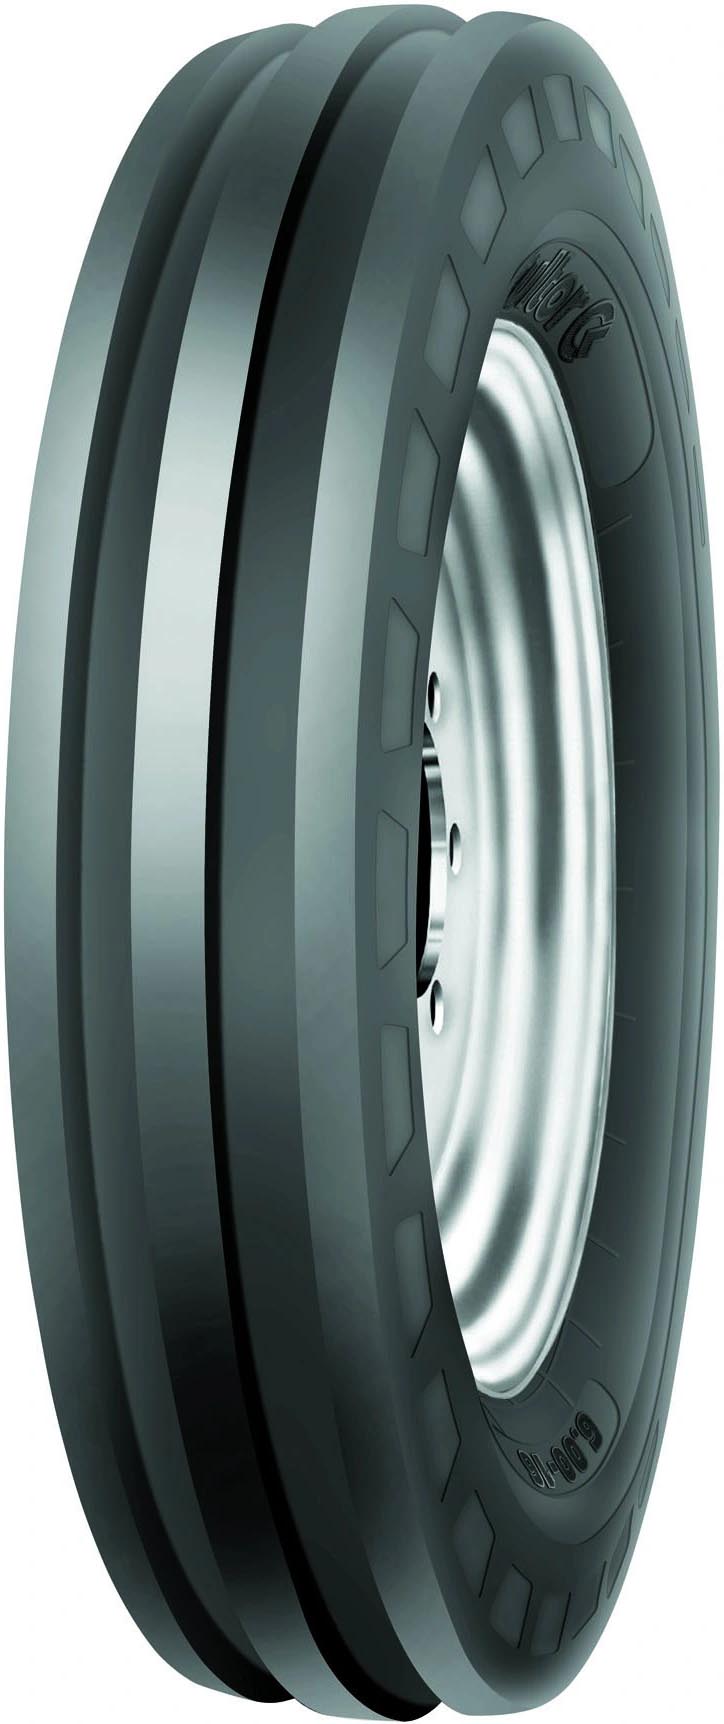 product_type-industrial_tires CULTOR AS-Front 04 8PR TT 6 R16 P